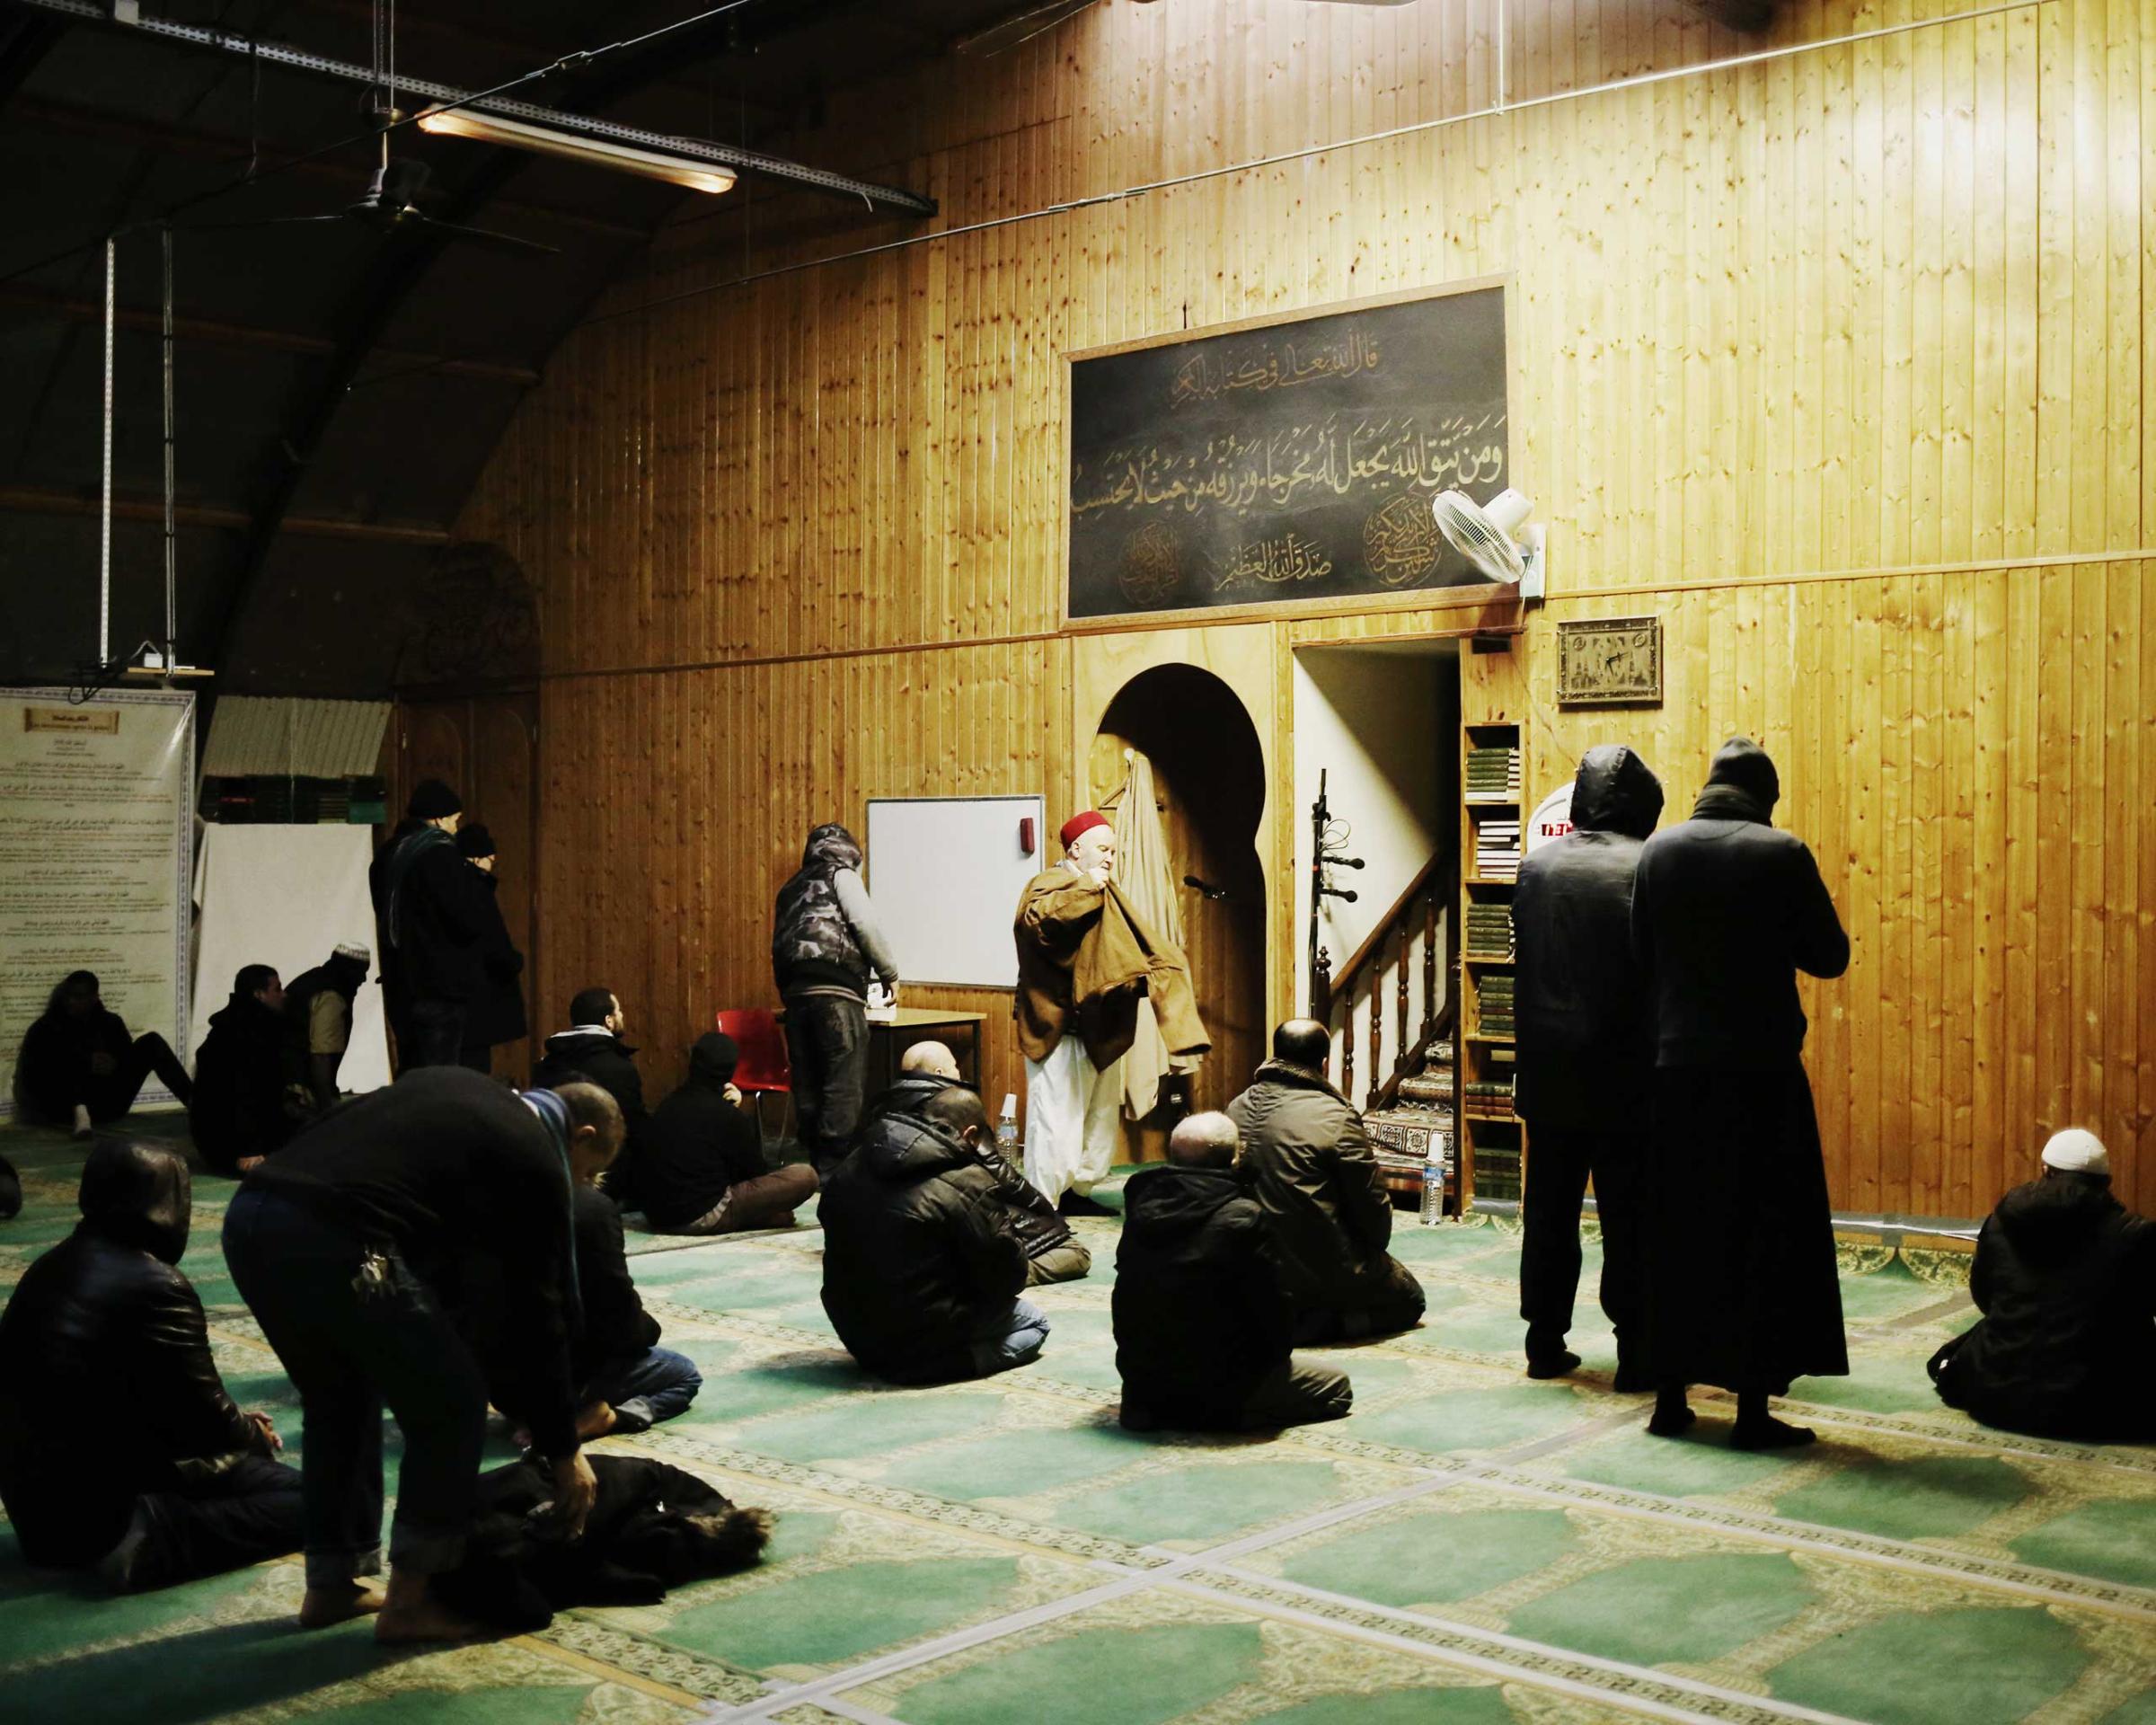 Men pray at a mosque in the 19th arrondissement in Paris, which the Kouachi brothers, the Charlie Hebdo attackers, had once attended, Jan. 13, 2015.